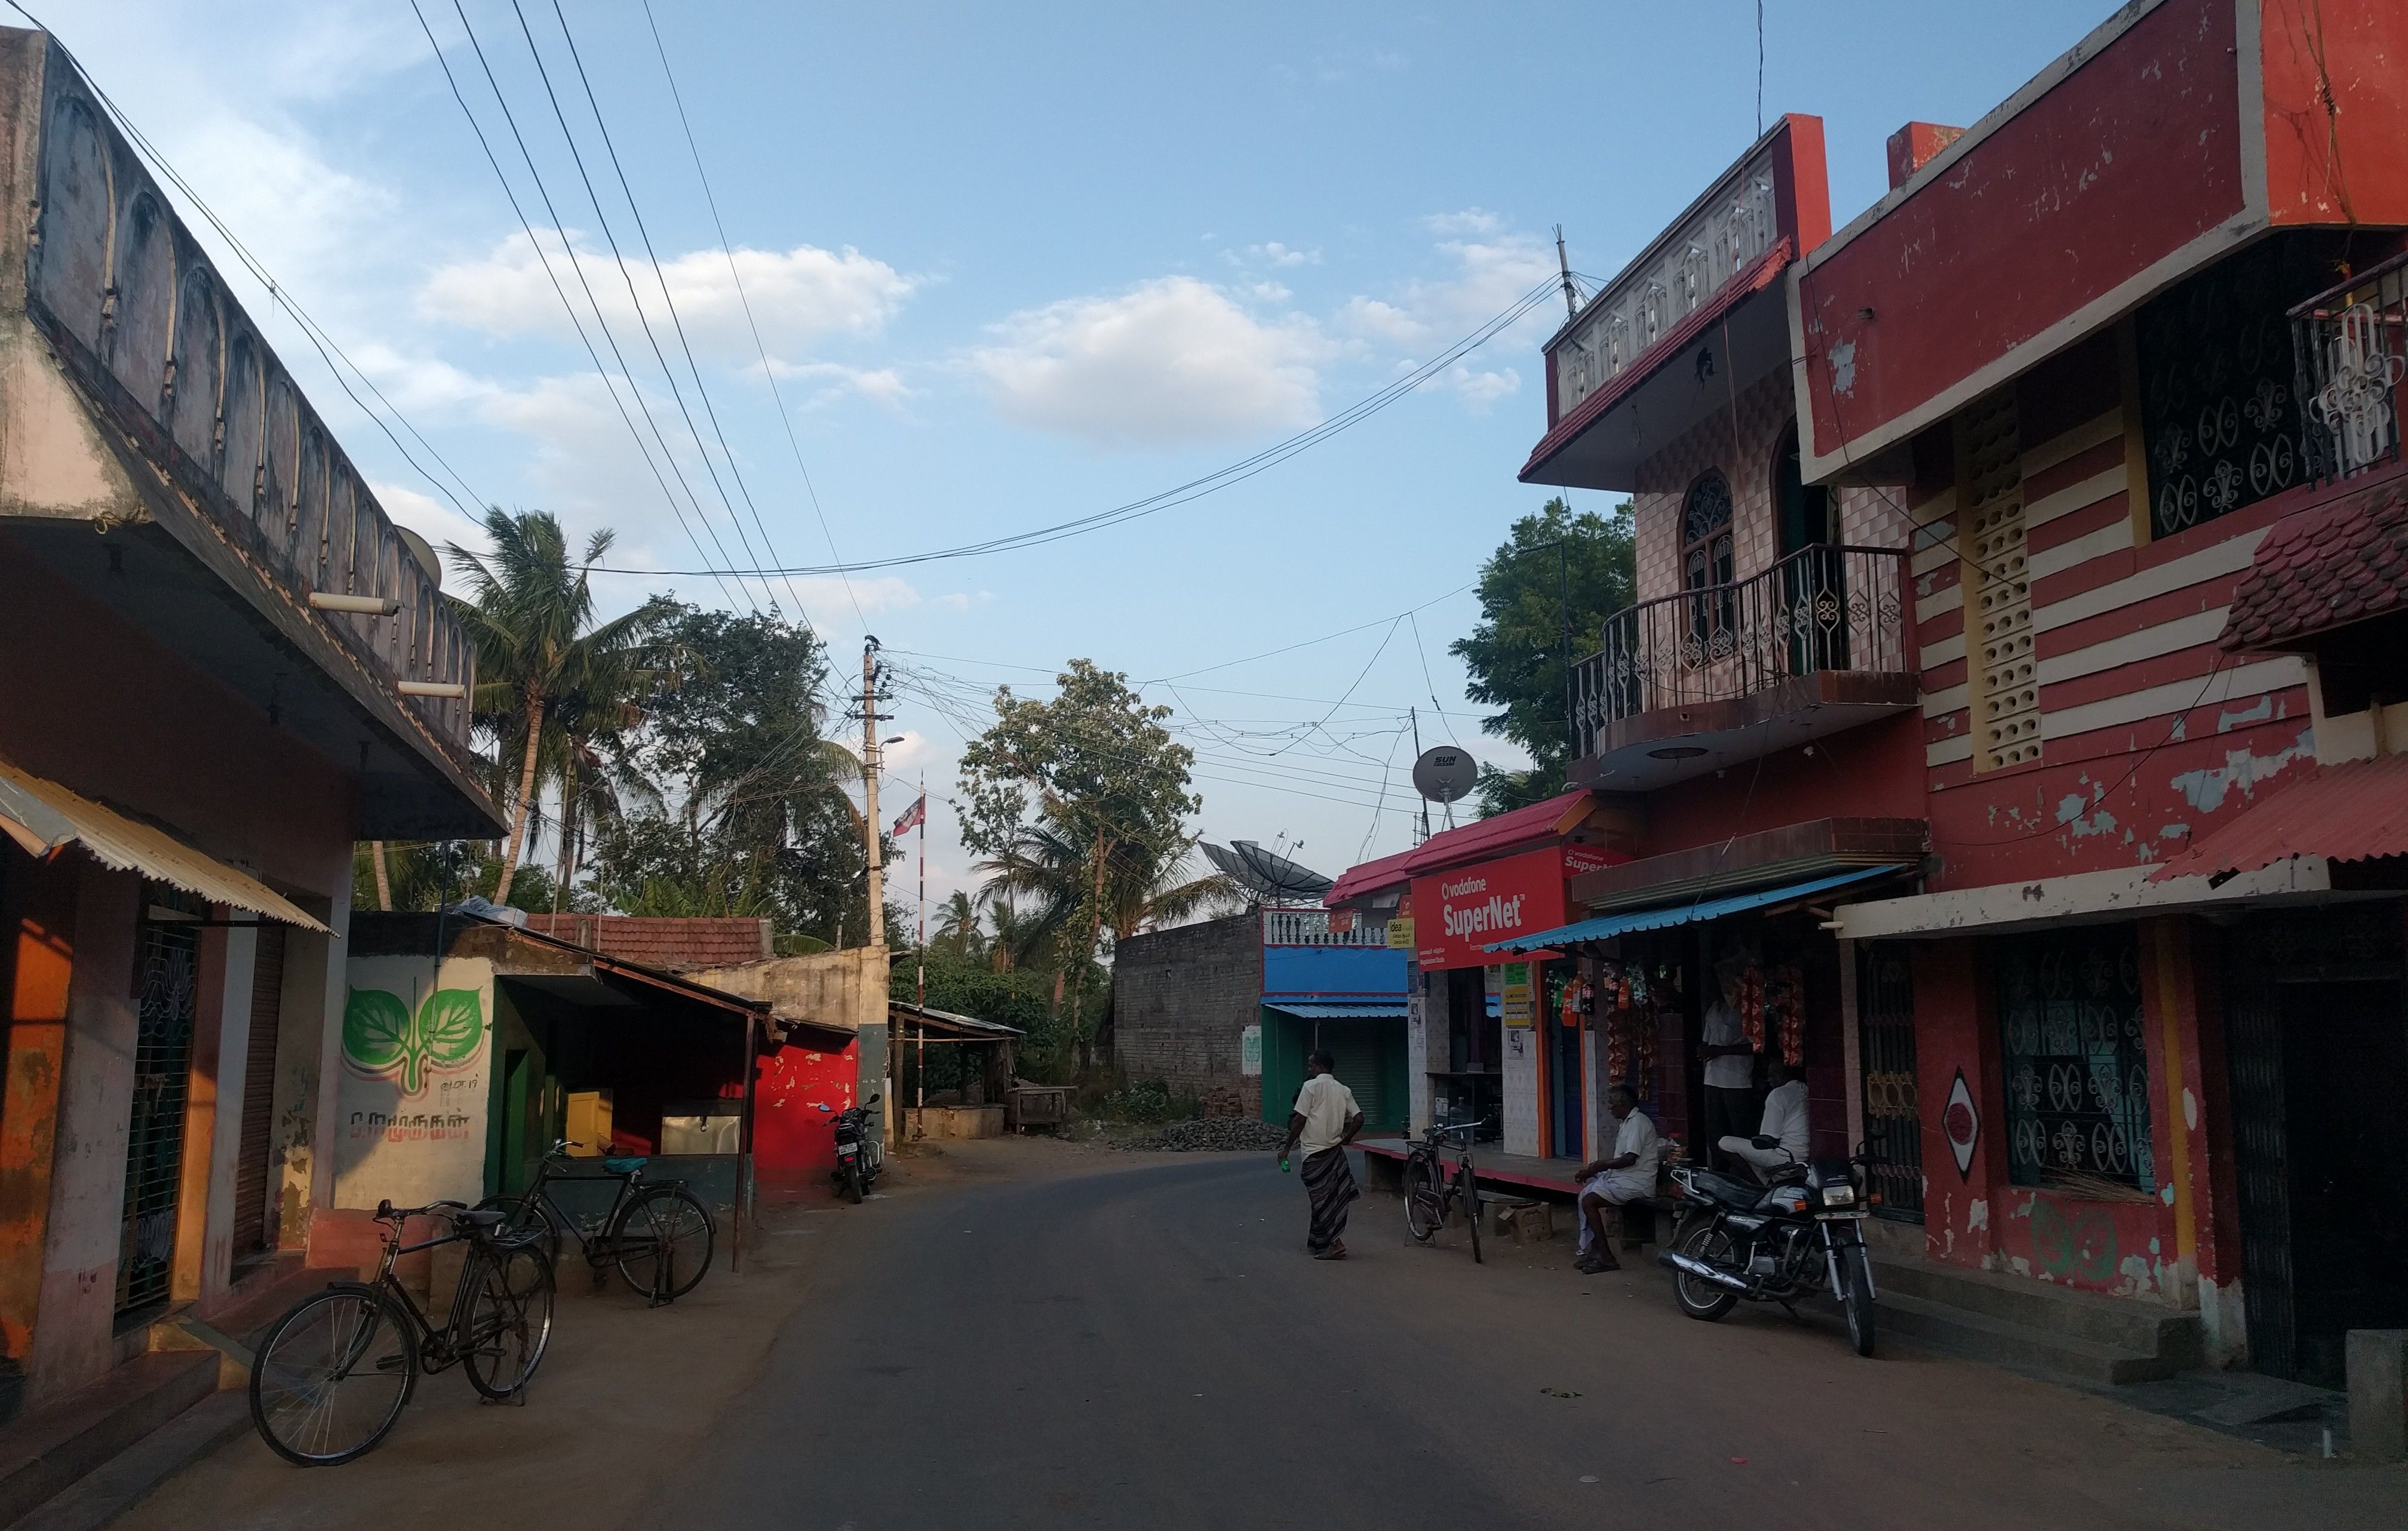 The town of Athimoor, where Ramya and her husband currently reside. Ramya was married to her uncle when she was 14 years old. Image by Praveena Somasundaram. India, 2017.